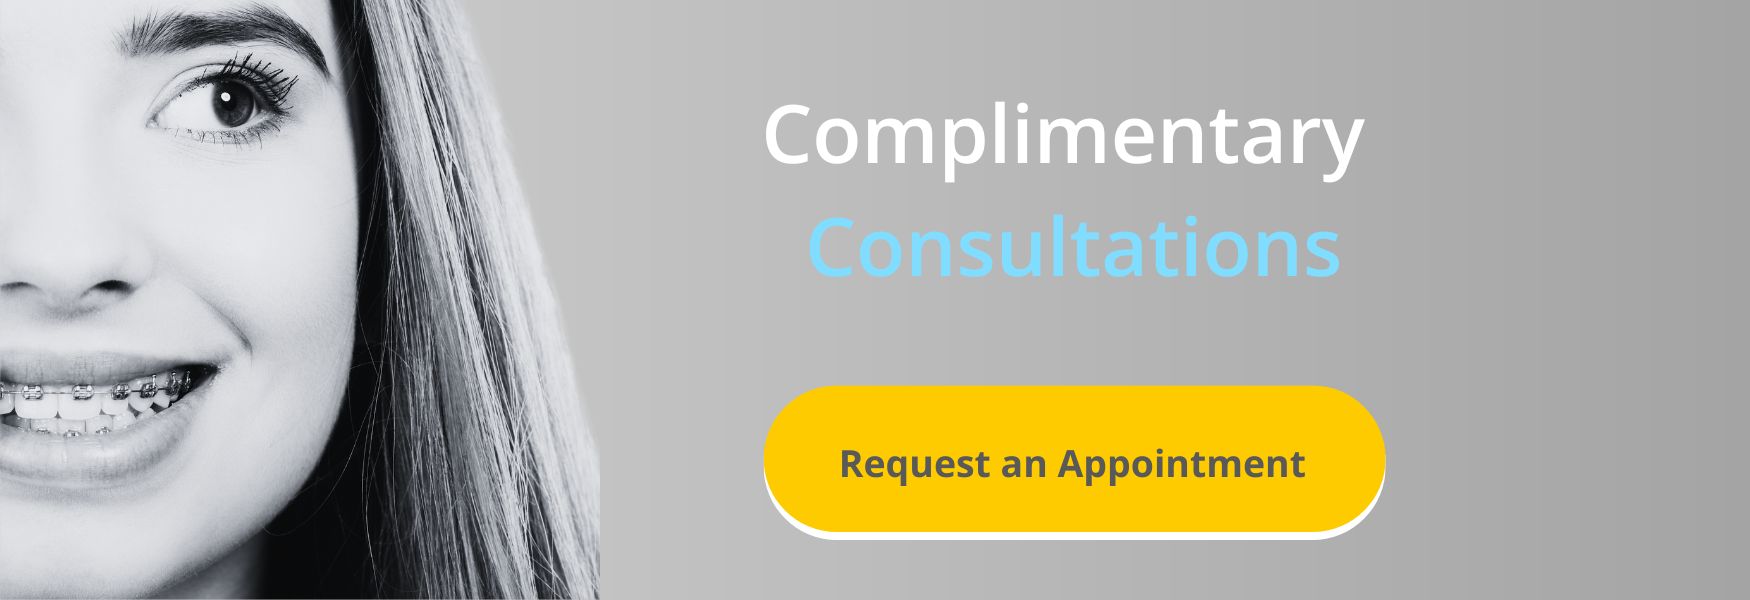 Complimentary Orthodontic Consultations Click to Request an Appointment